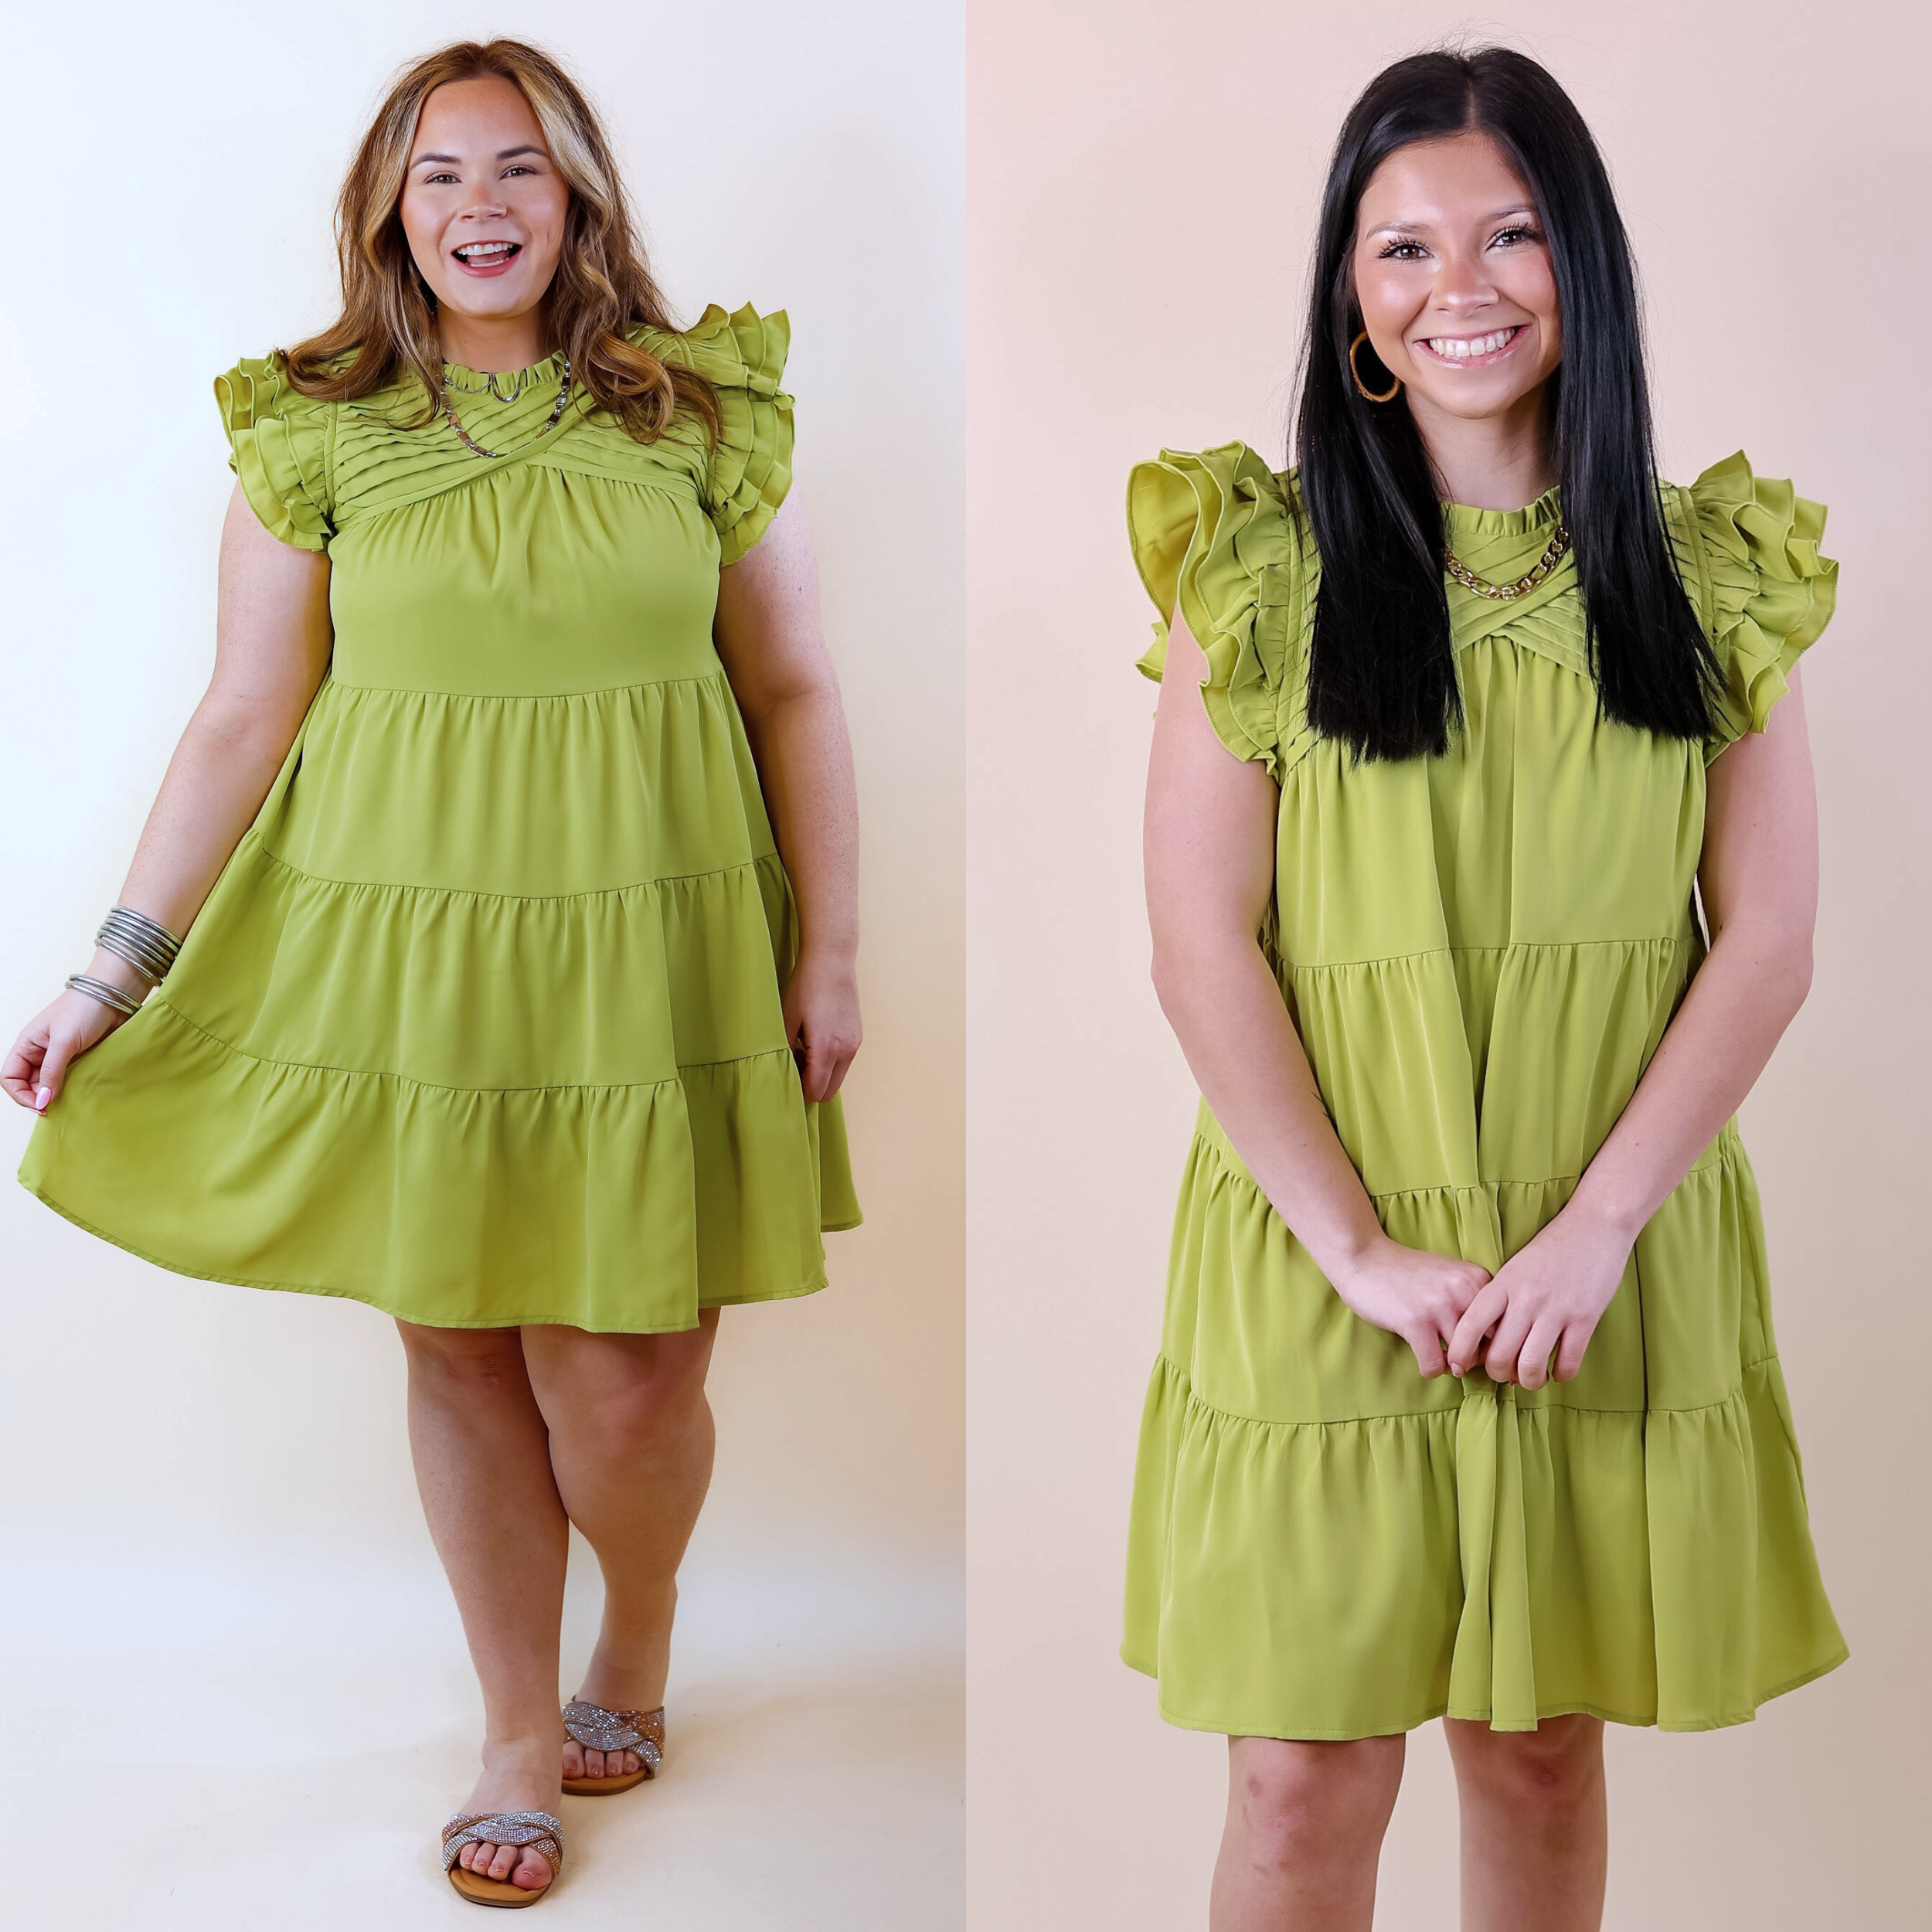 Chic On Scene Ruffle Tiered Dress with Pleated Detailing in Pistachio Green - Giddy Up Glamour Boutique